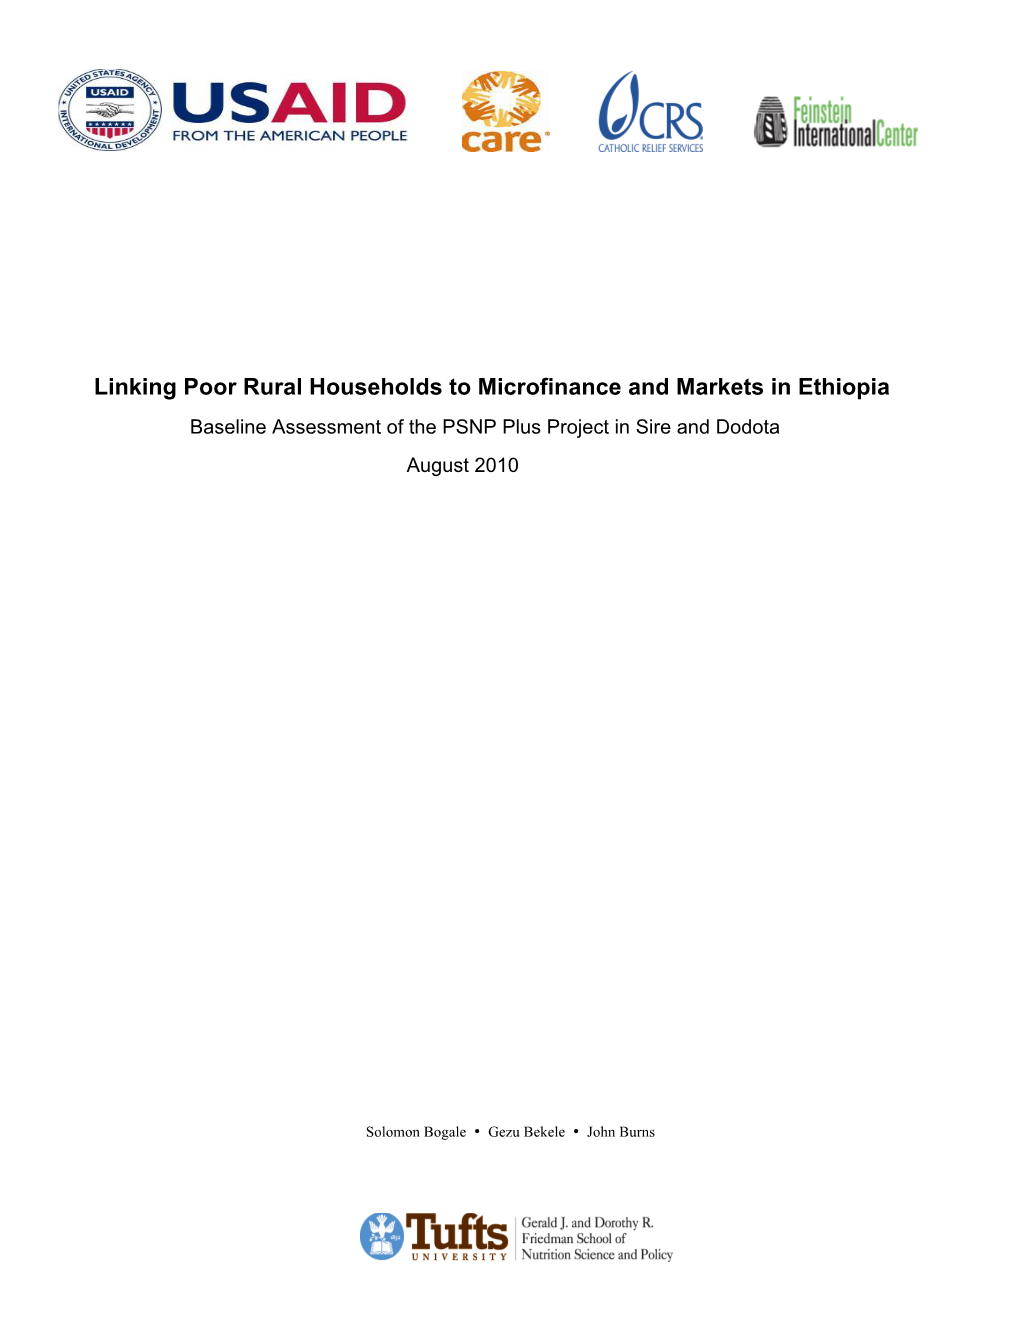 Linking Poor Rural Households to Microfinance and Markets in Ethiopia